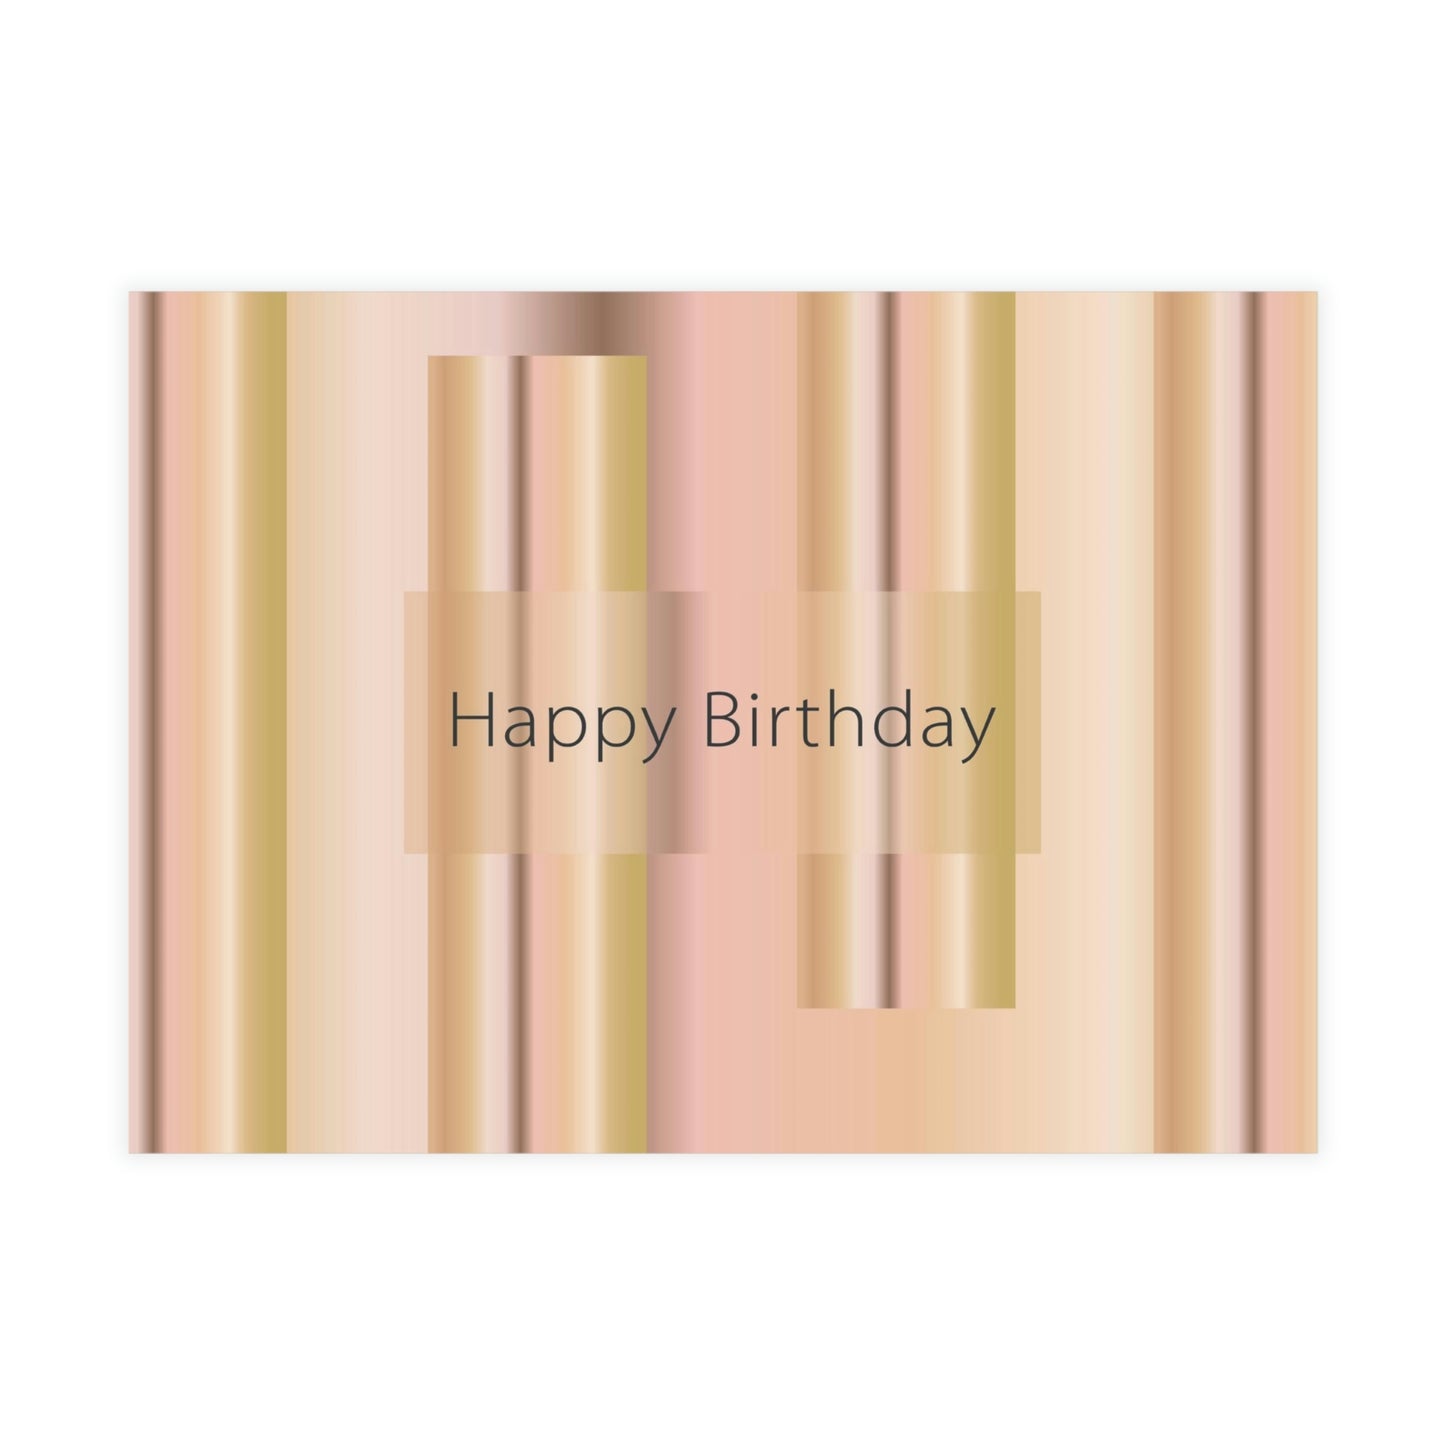 Unfolded Greeting Cards Horizontal (10, 30, and 50pcs) Happy Birthday - Design No.100